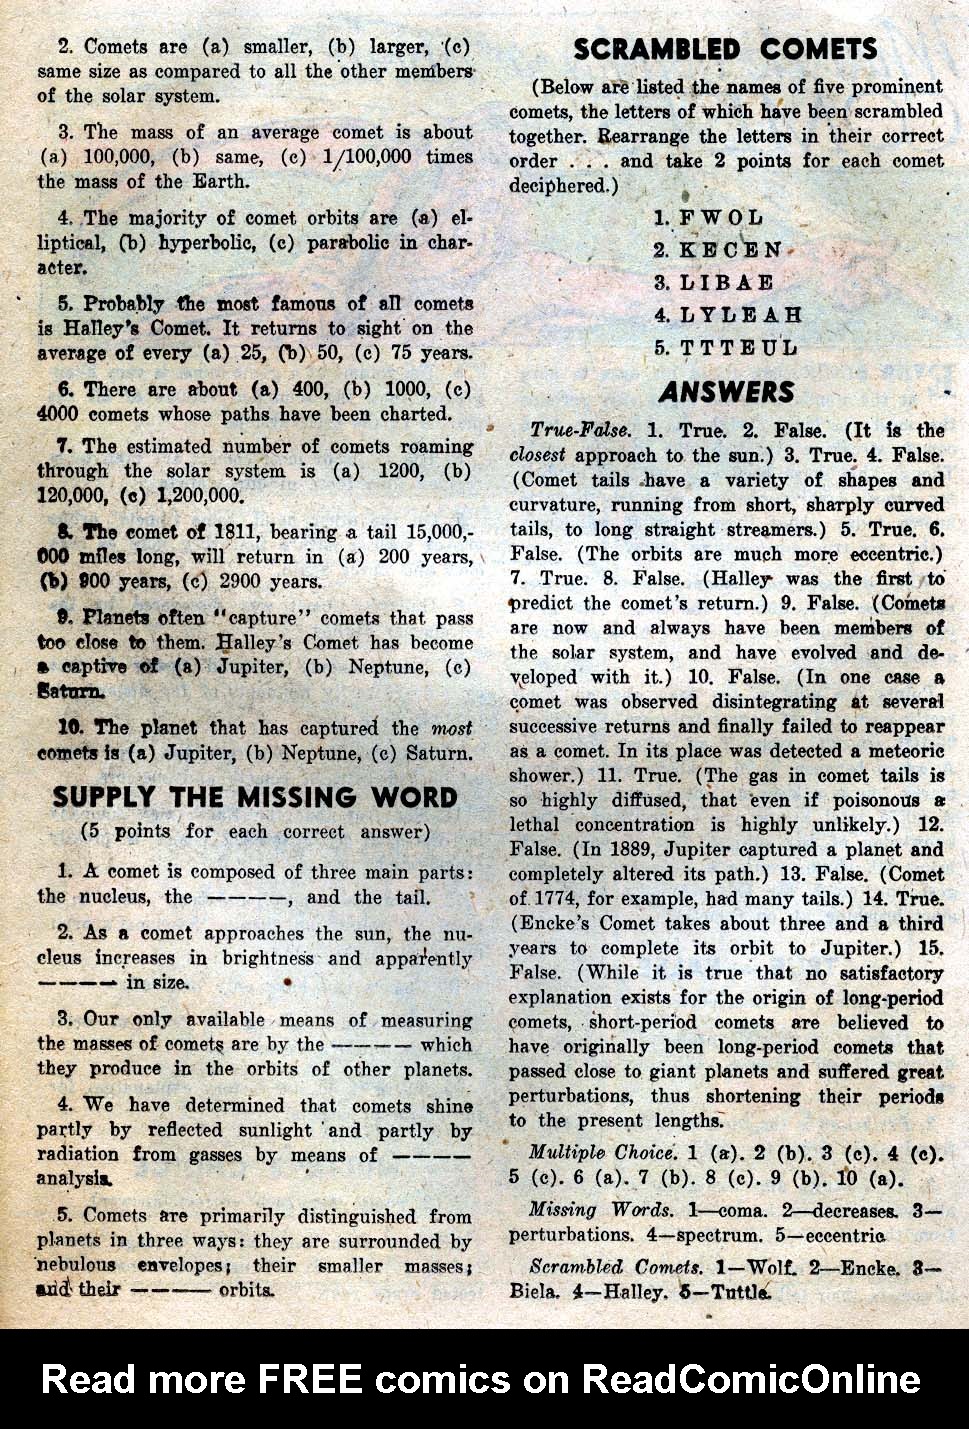 Mystery in Space (1951) 1 Page 37